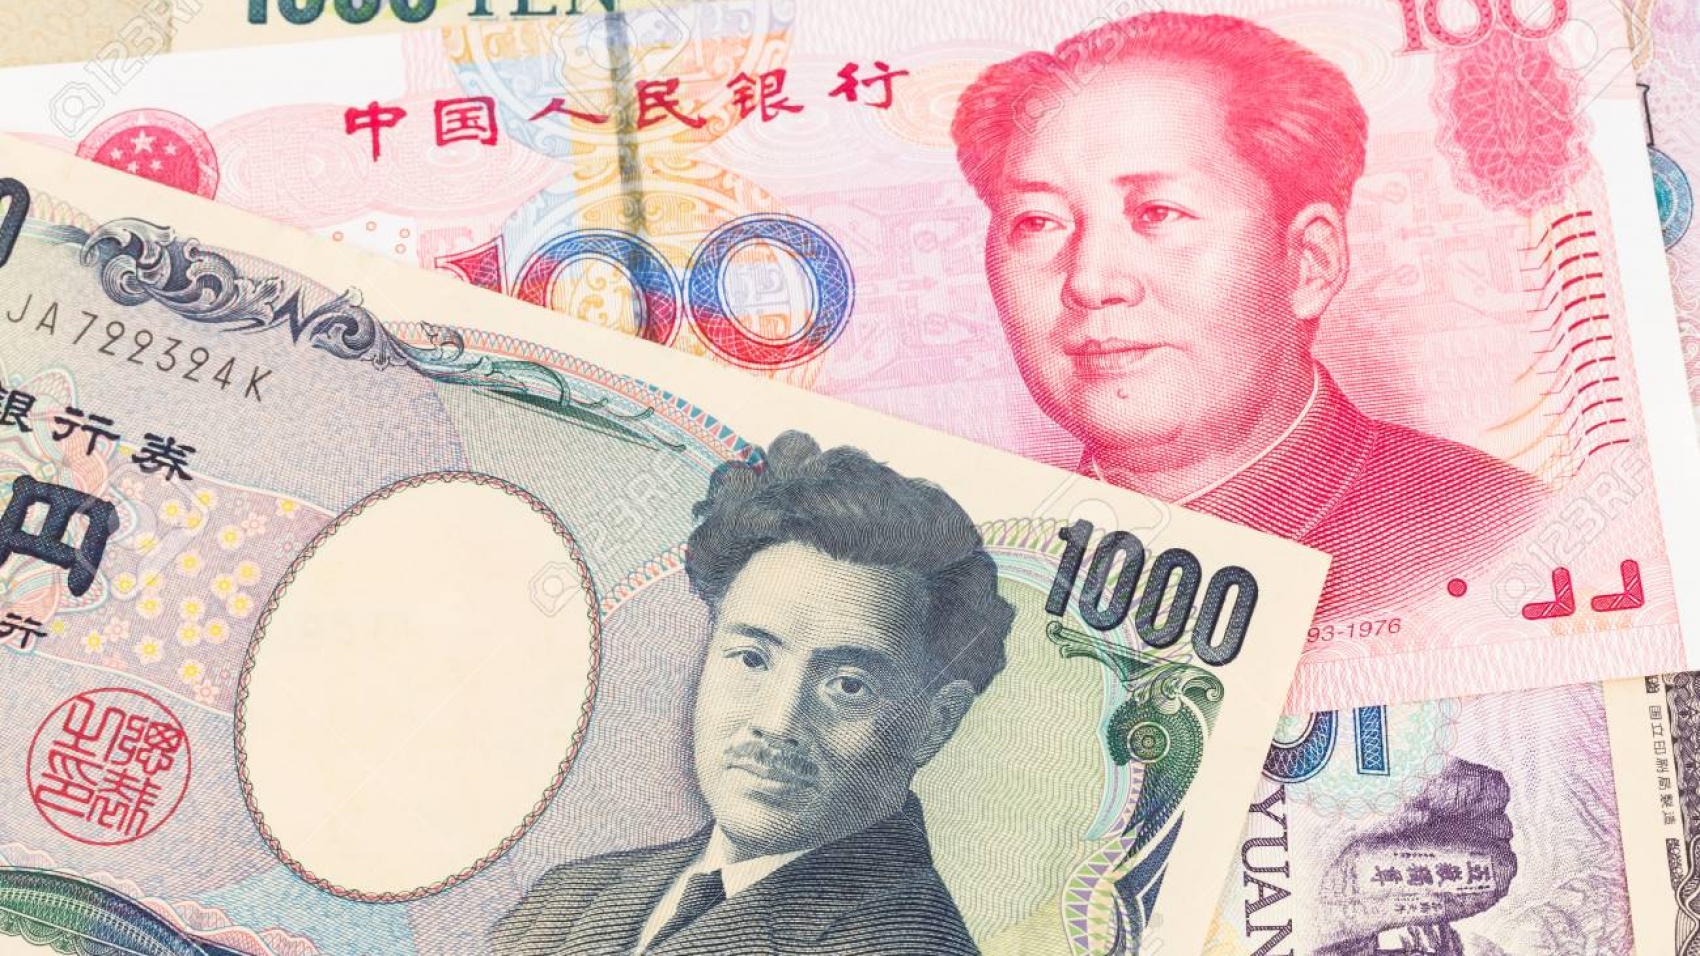 Japanese Yen and Chinese Yuan banknote money